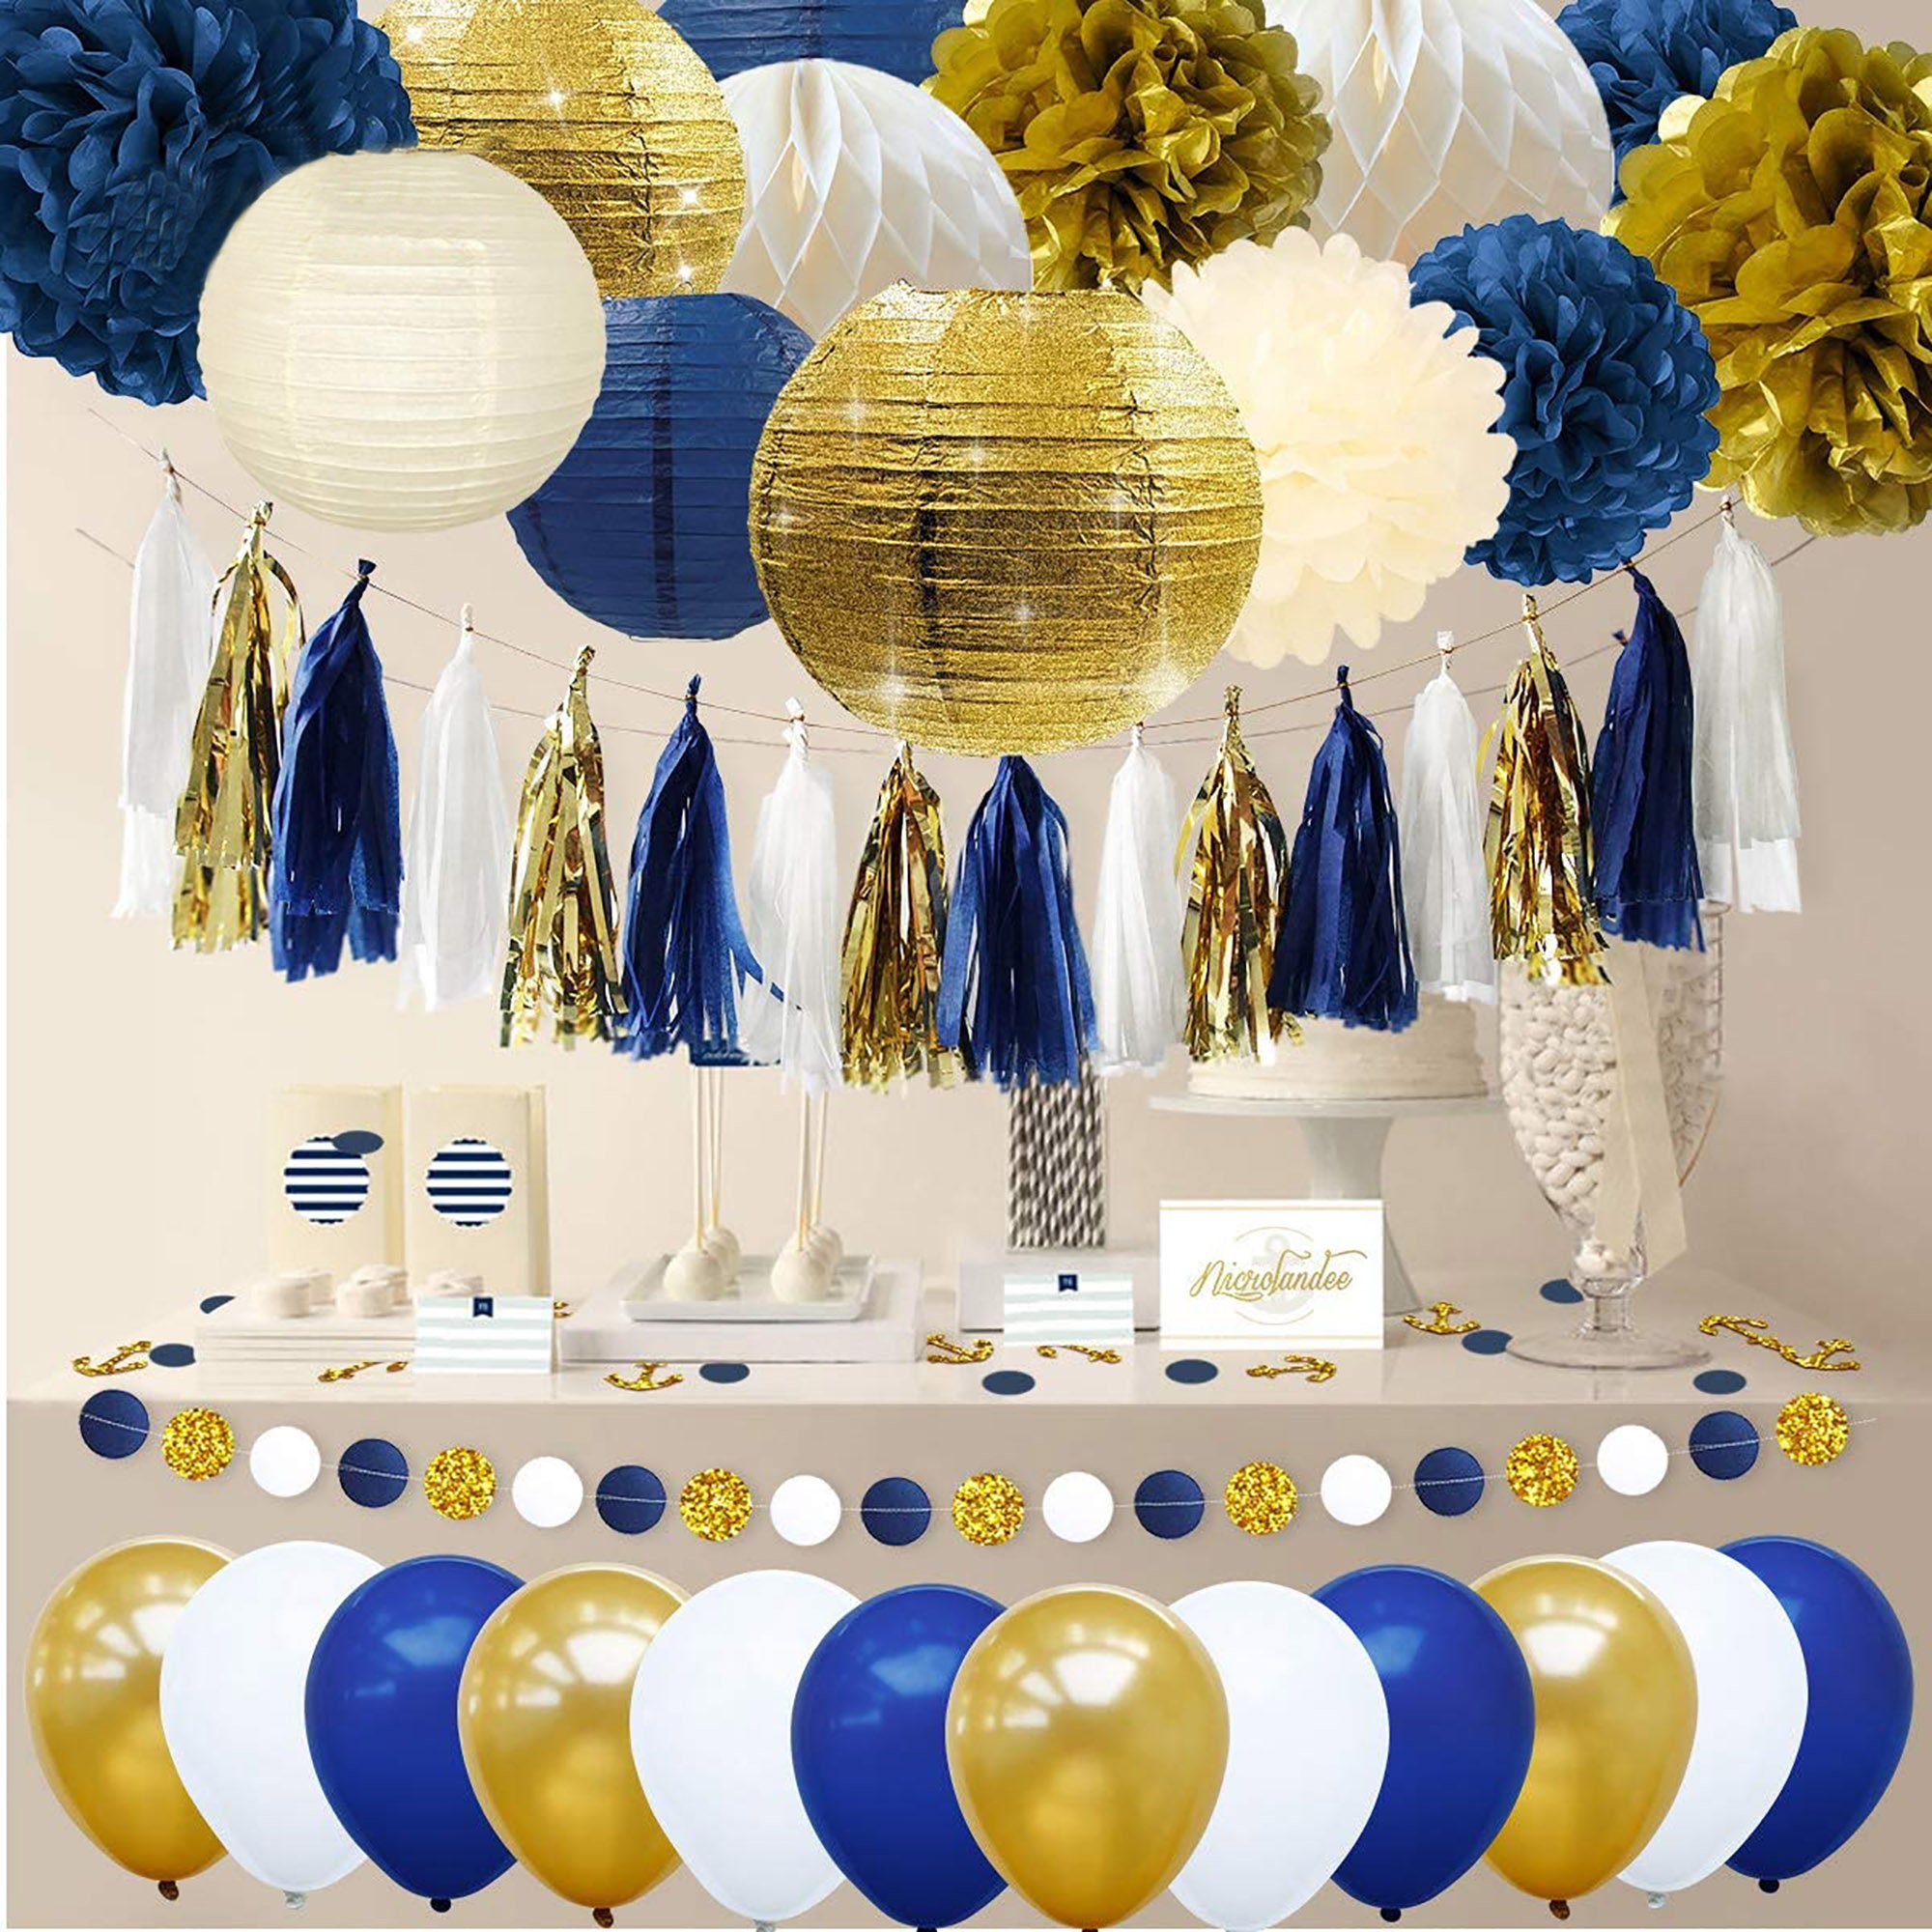  Gold Party Decorations Hanging Paper Fans Paper Lanterns Pom  Poms Flower Pennant Banner for Rustic Wedding Neutral Baby Shower  Bachelorette Graduation Birthday Party Supplies : Home & Kitchen